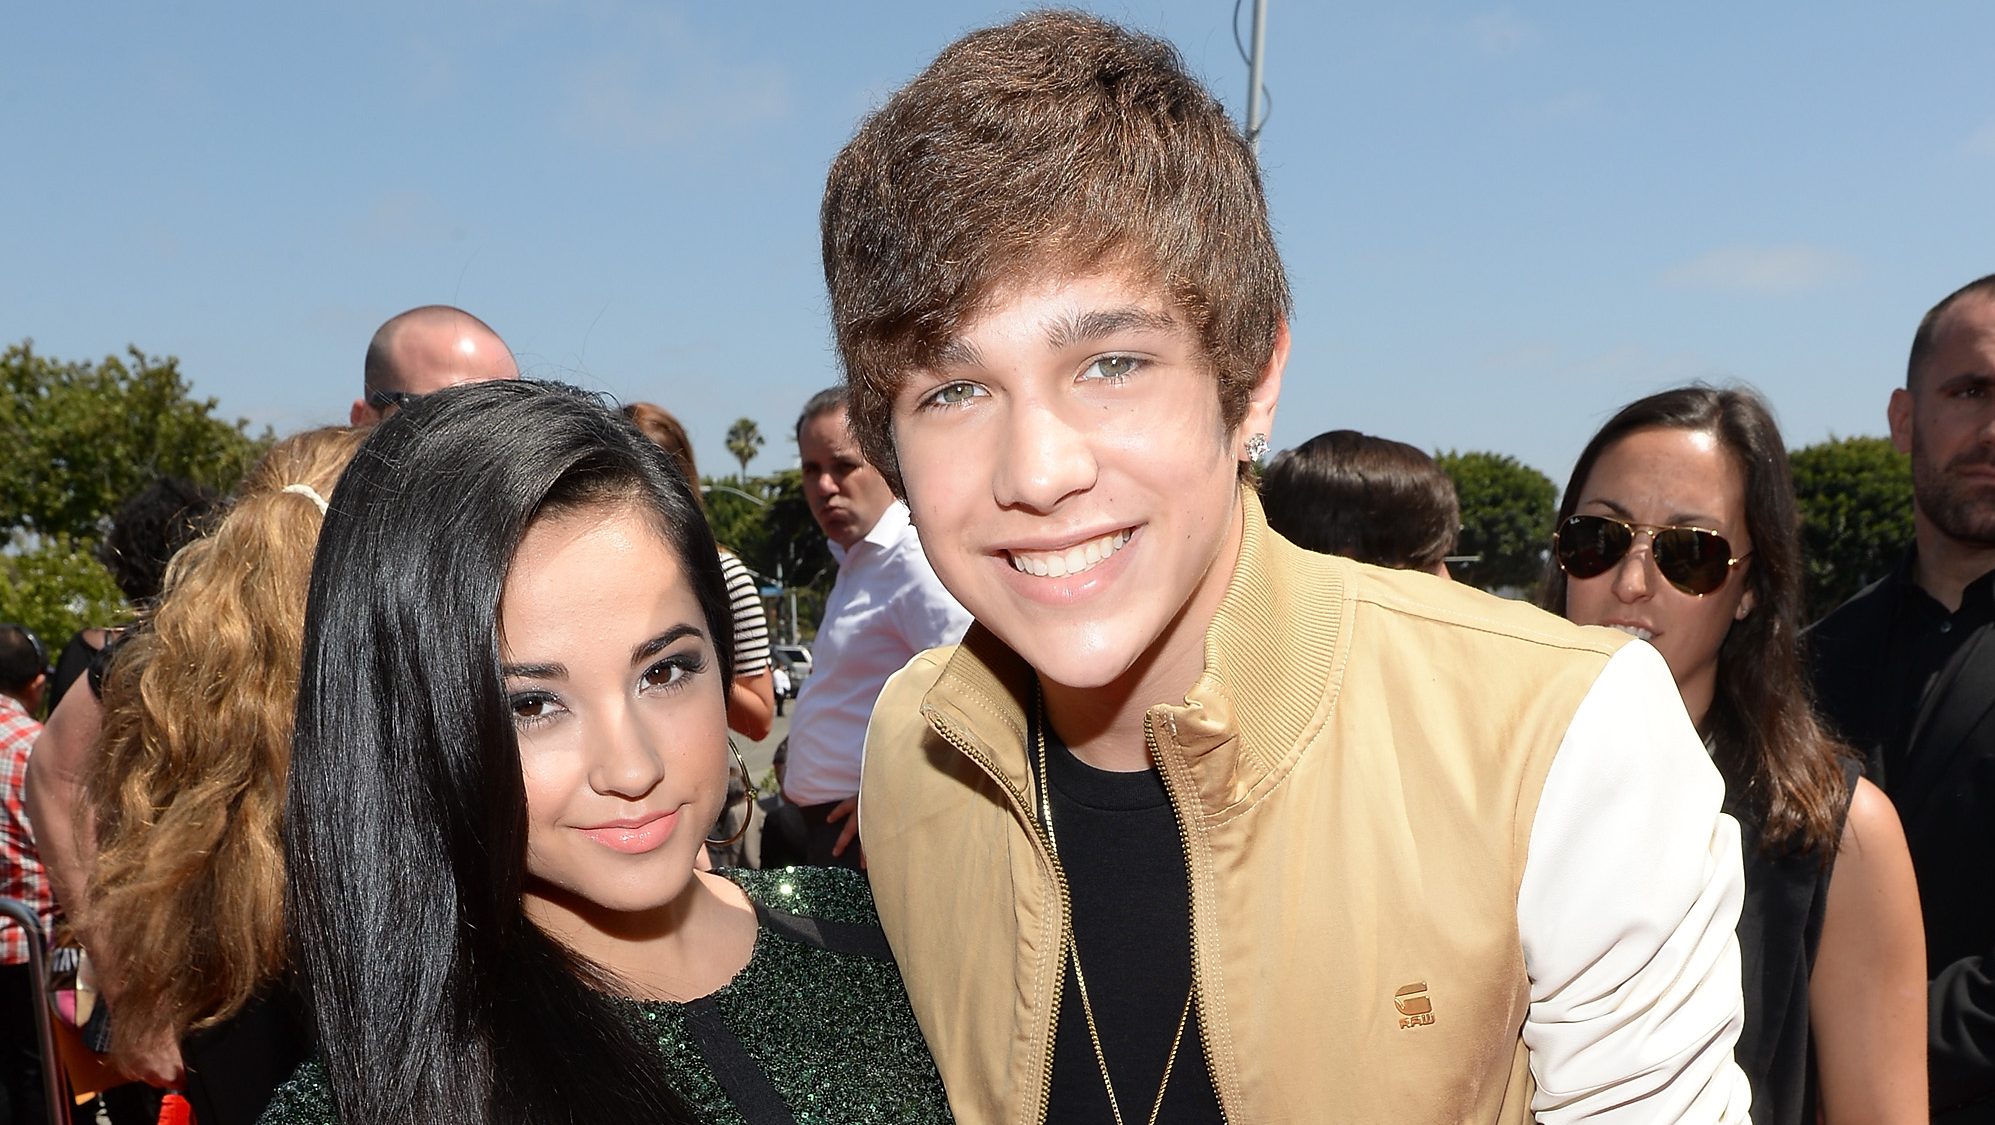 is becky g and austin dating anyone 2018